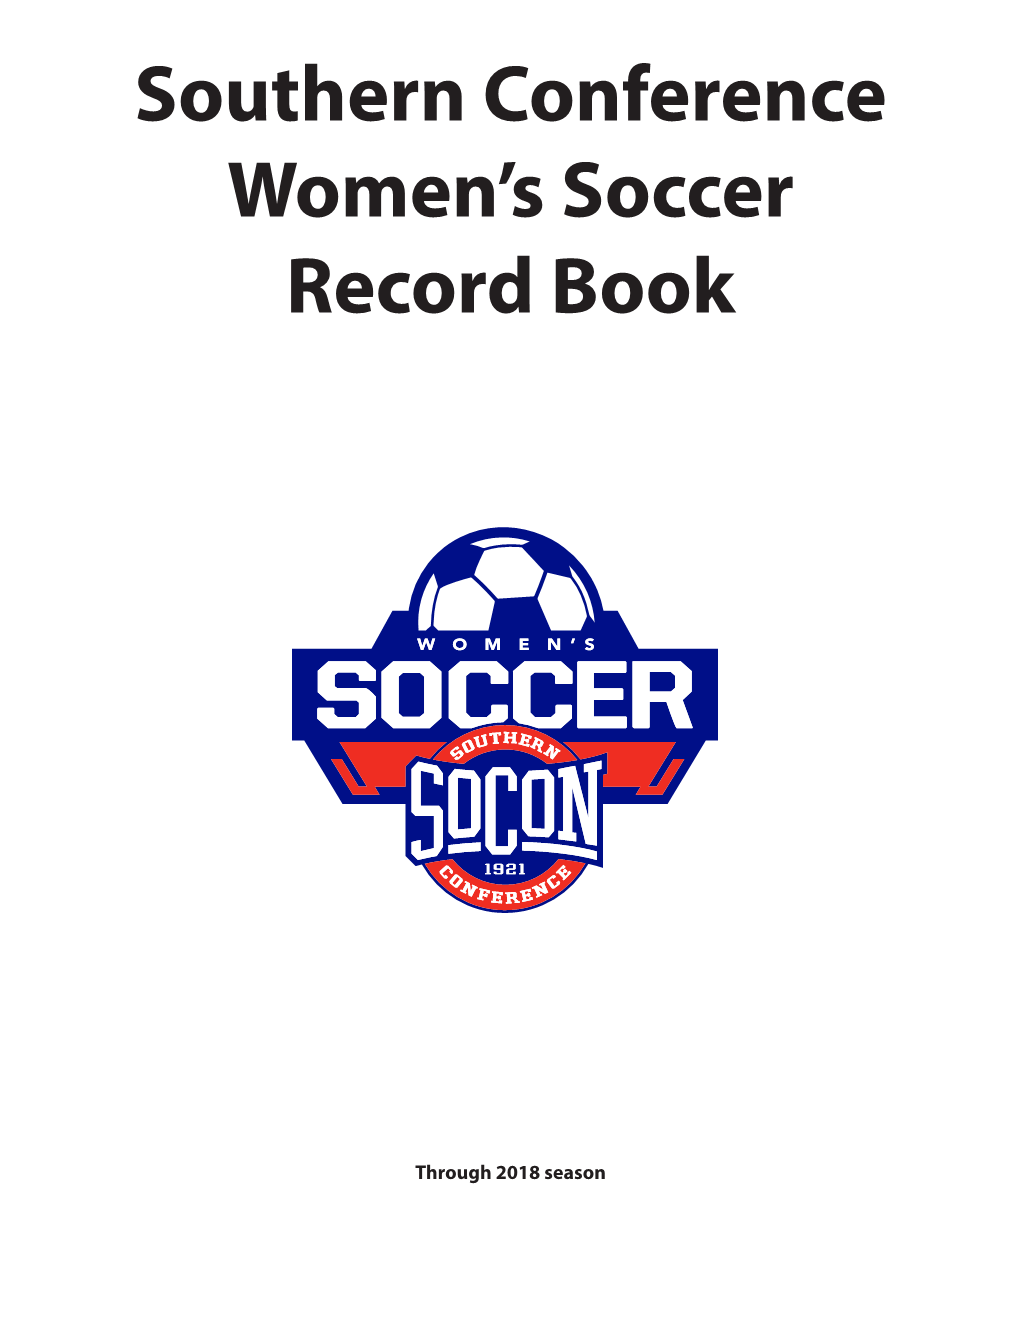 Southern Conference Women's Soccer Record Book